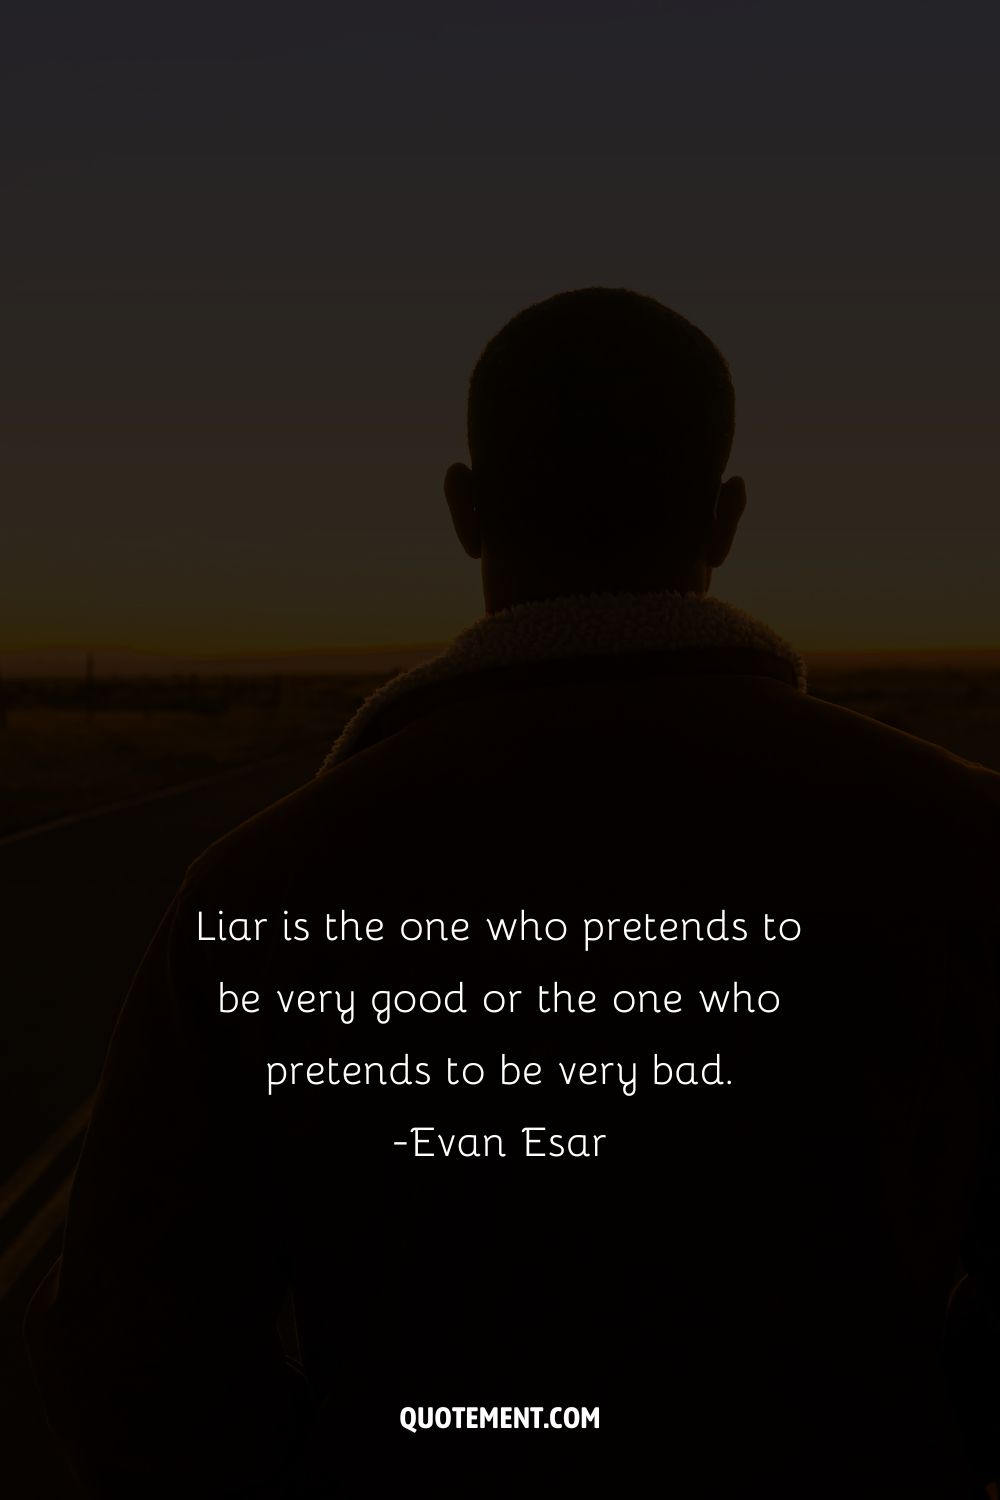 Liar is the one who pretends to be very good or the one who pretends to be very bad